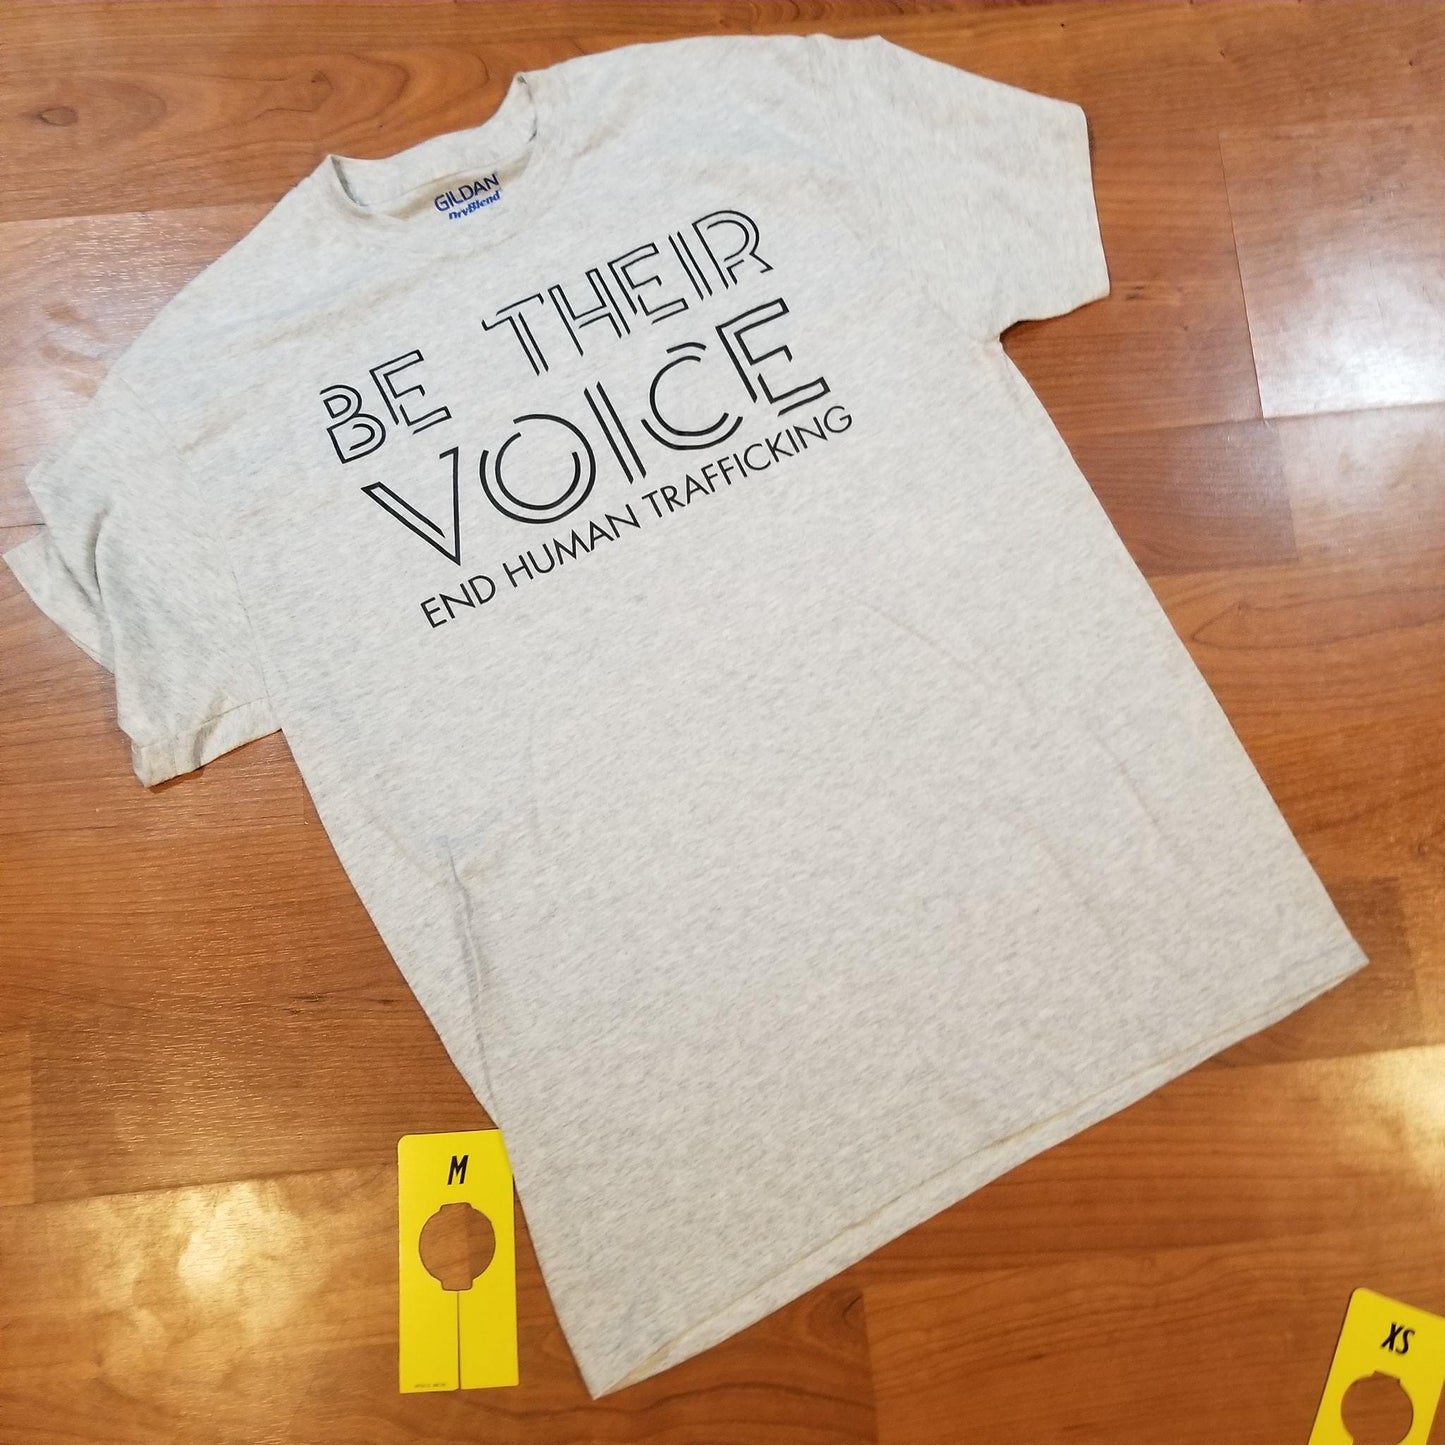 Be Their Voice - Kicks and Kindness - Shirts & Tops -